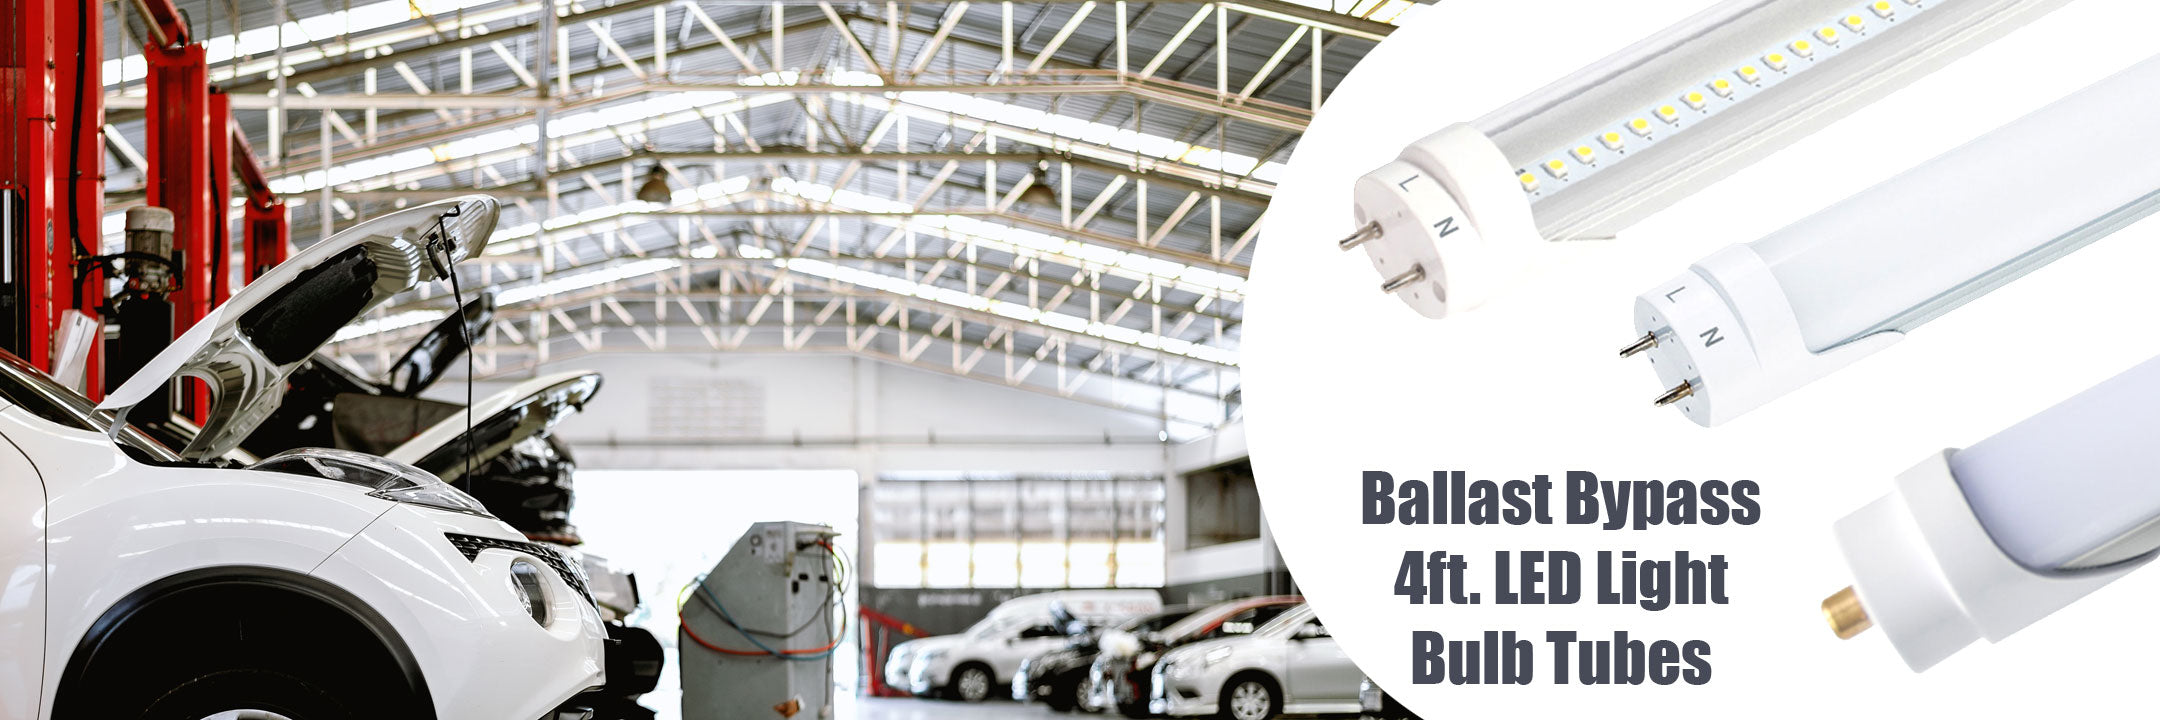 Ballast Bypass LED light bulb tubes for auto shops, commercial areas, warehouses and more